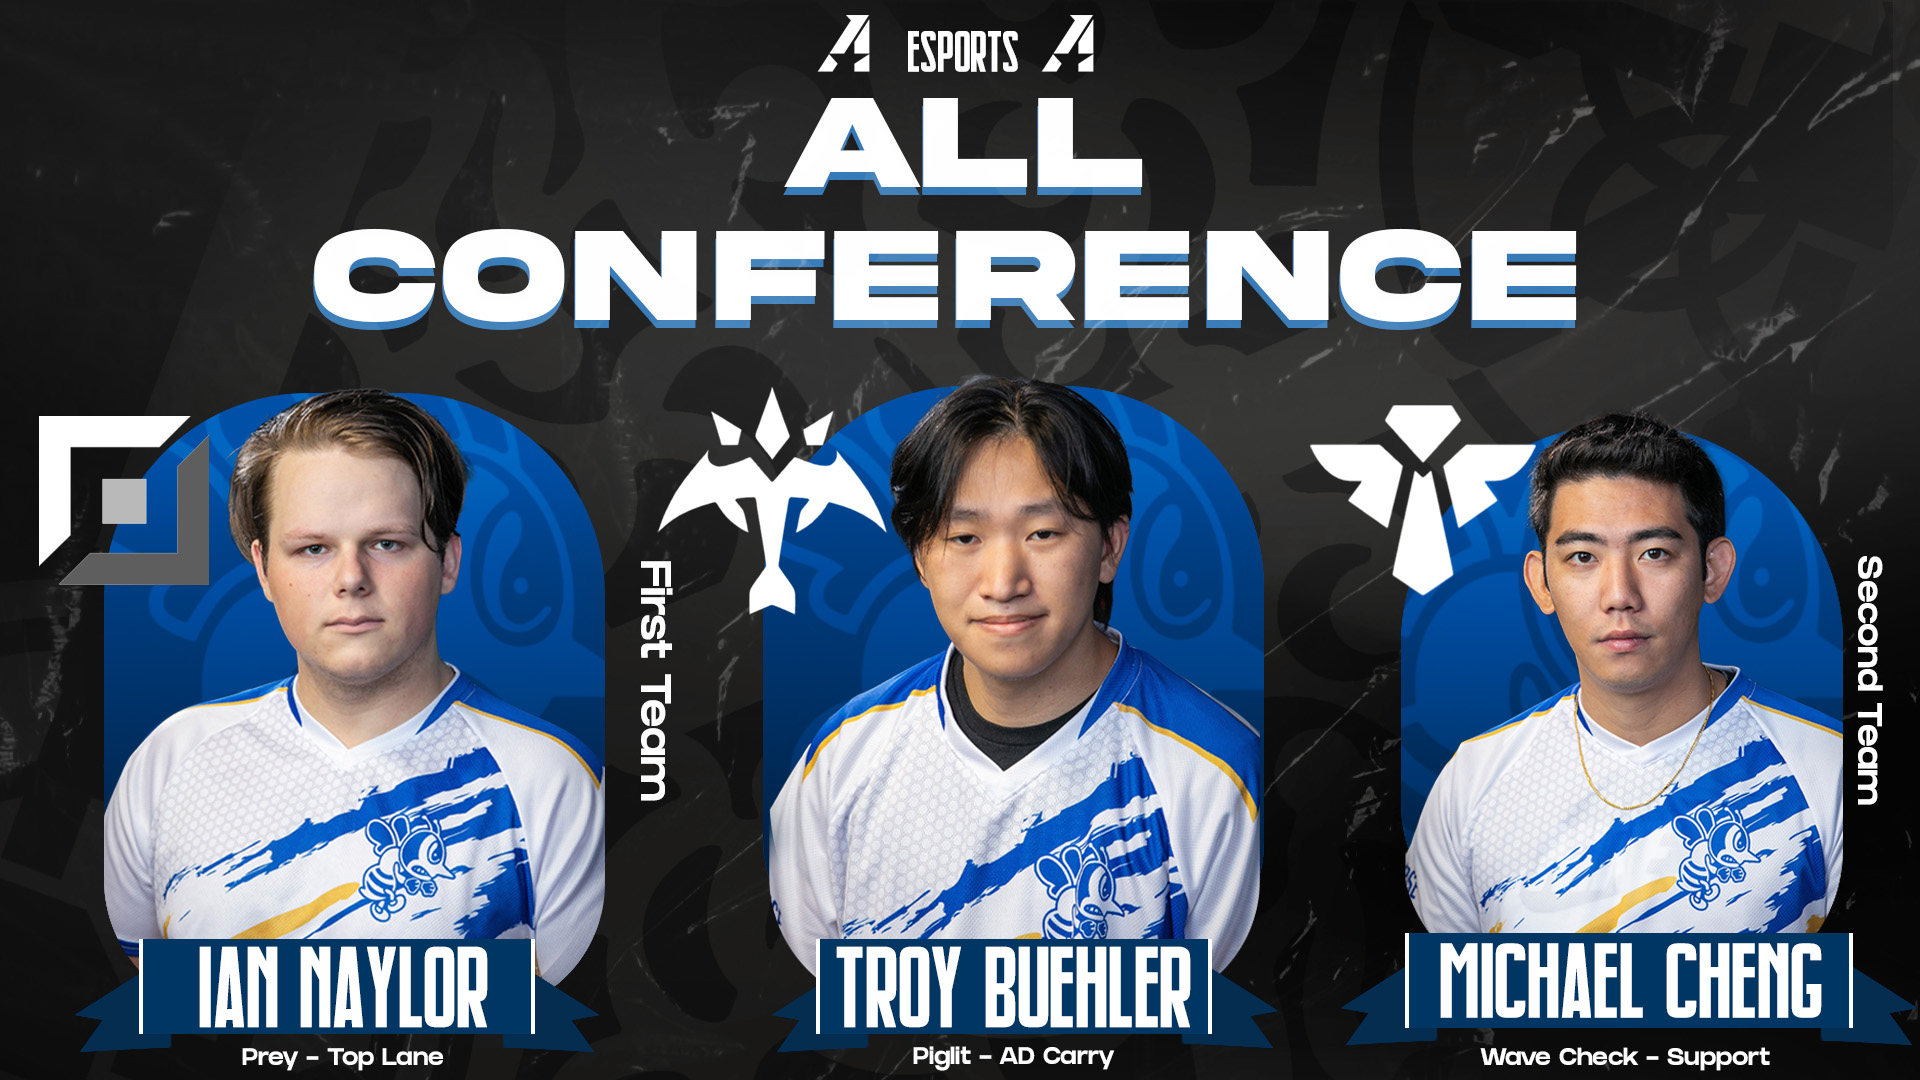 Three Bees named to Heart Esports League of Legends All-Conference team